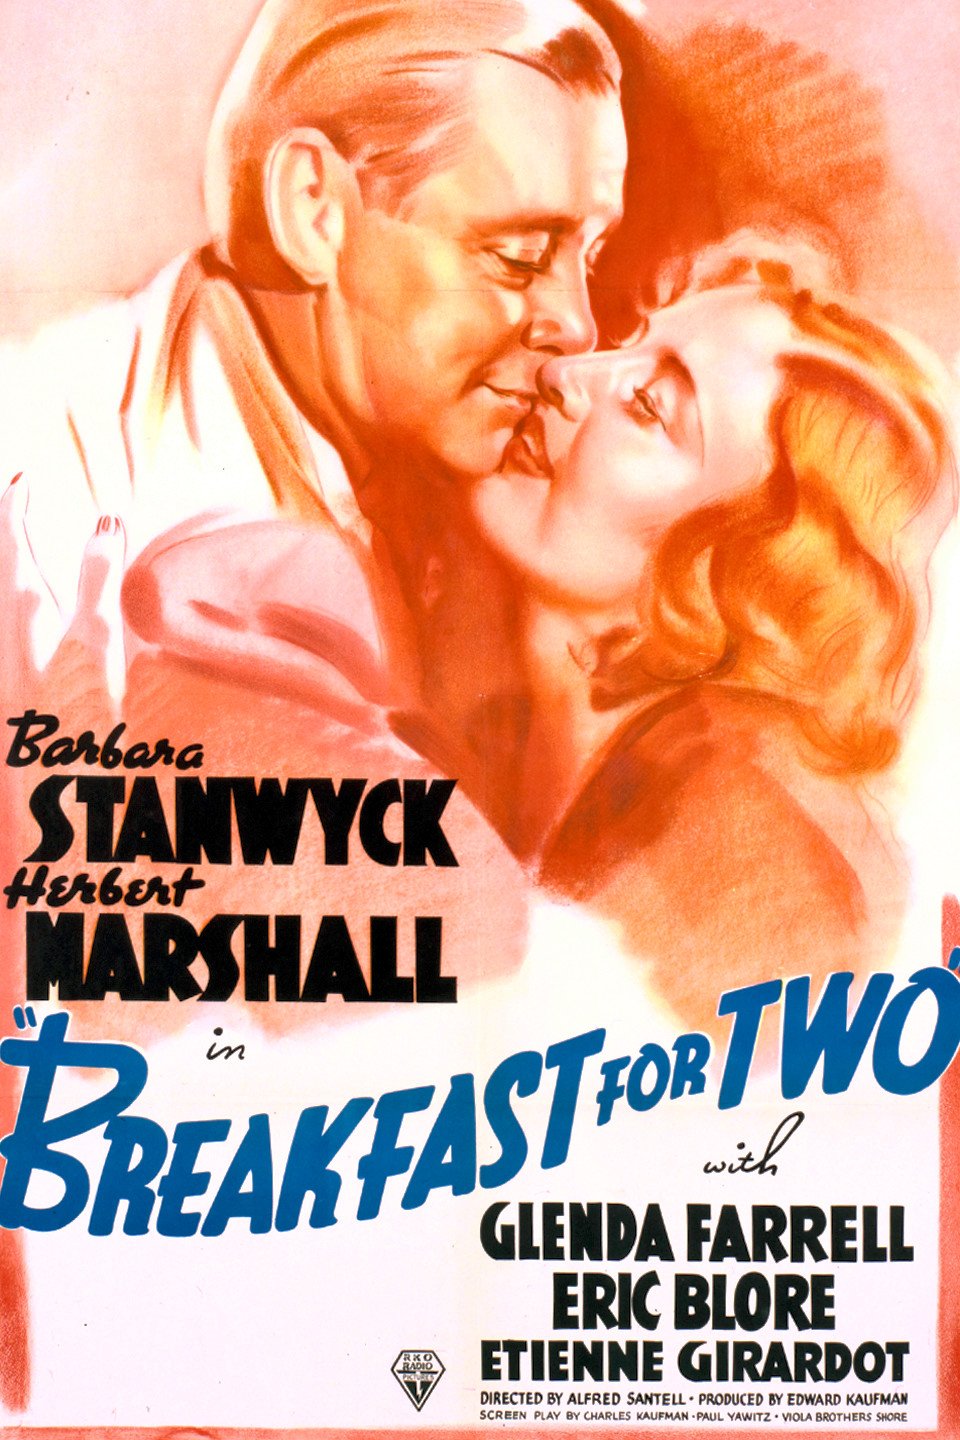 Poster of the movie Breakfast for Two